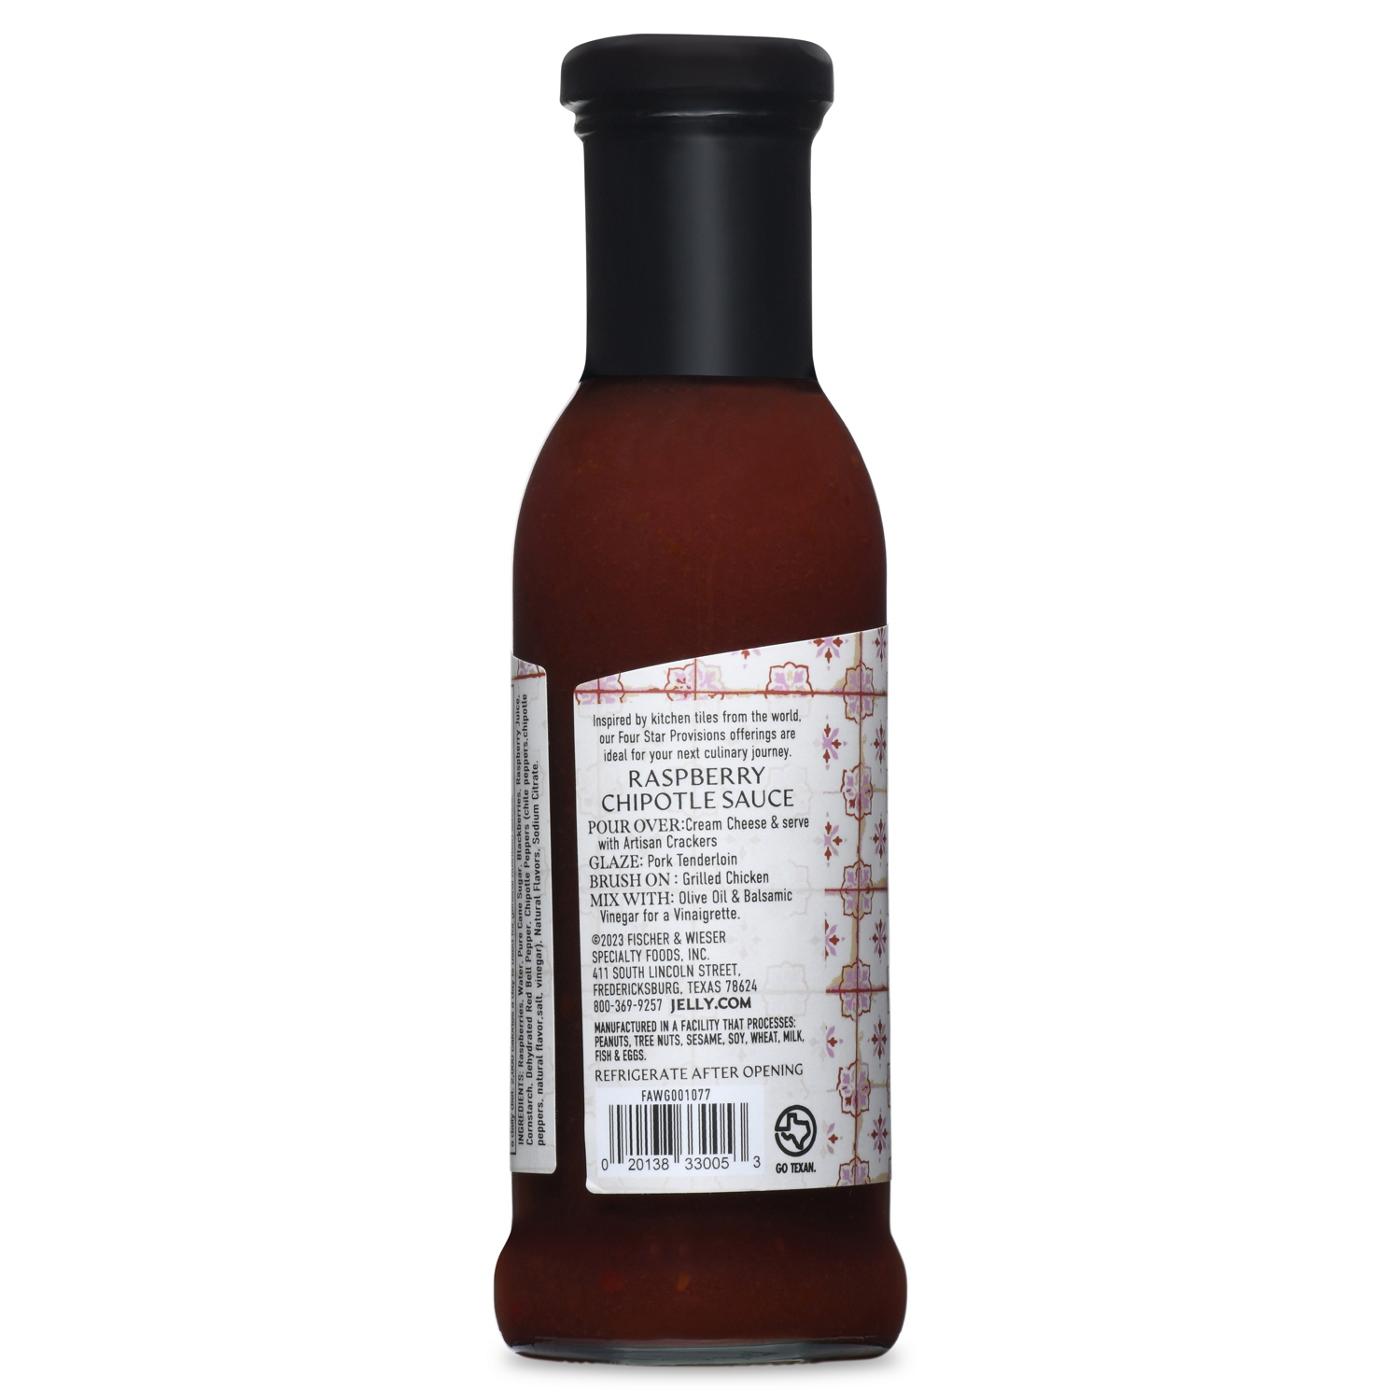 Fischer & Wieser Four Star Provisions Raspberry Chipotle Sauce; image 3 of 3